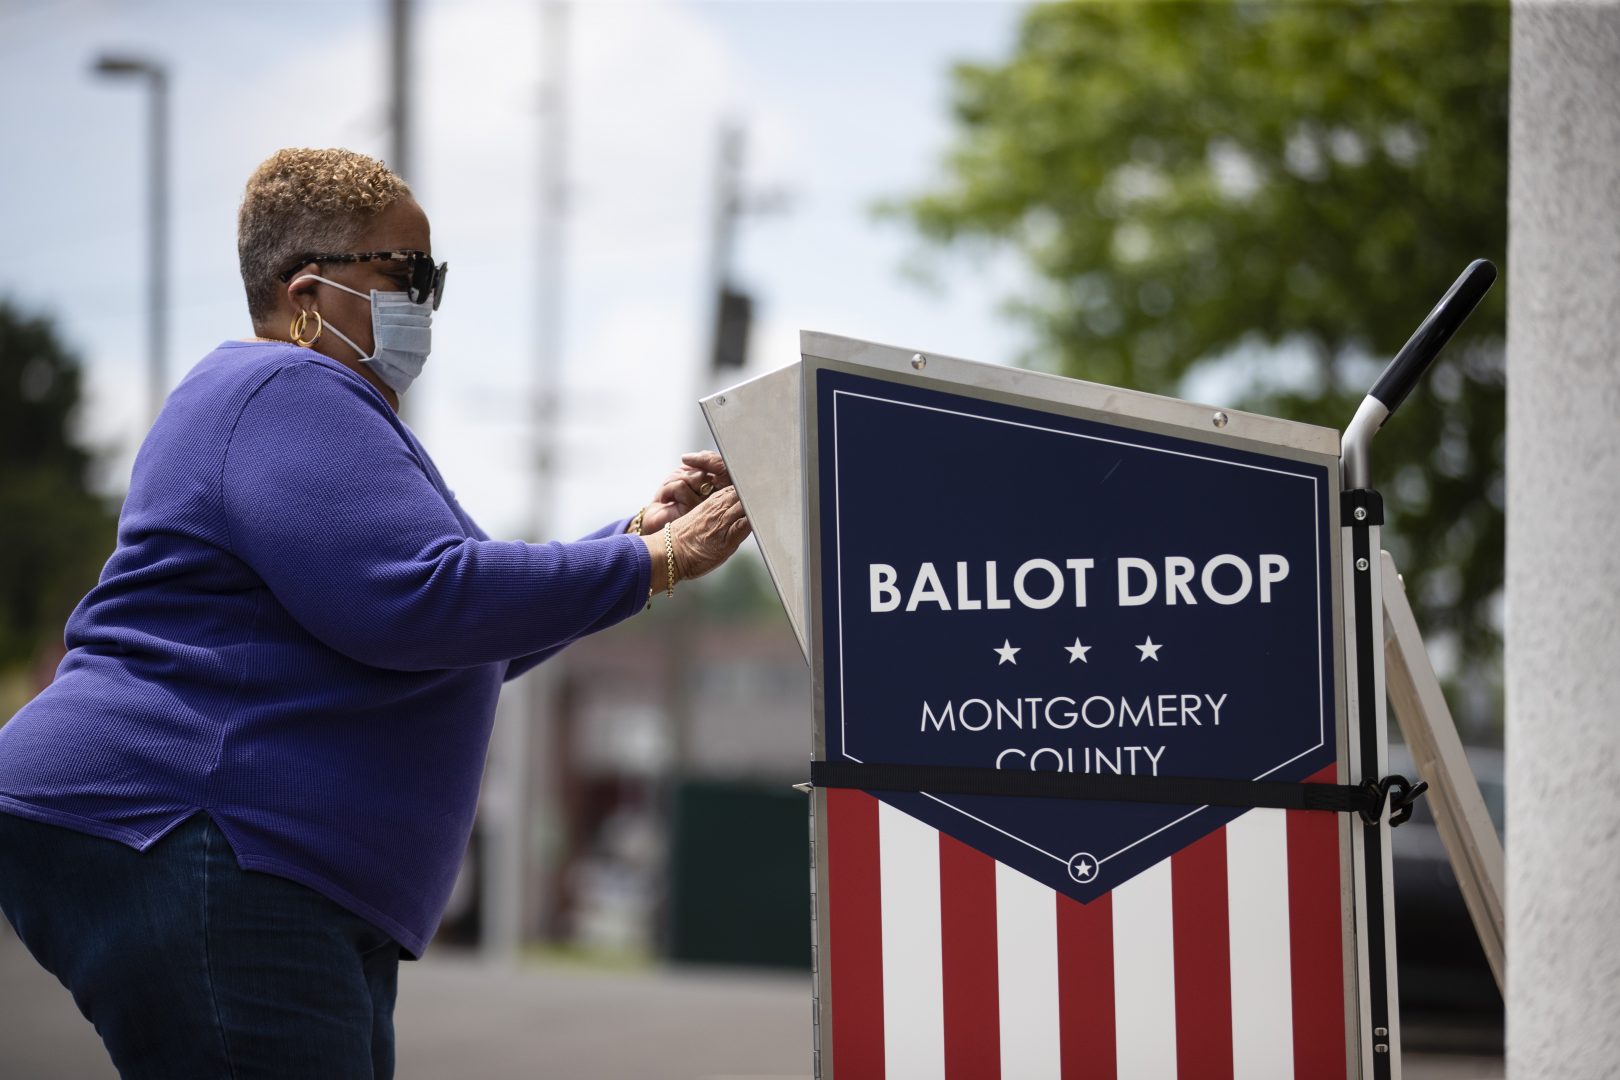 A voter drops off their mail-in ballot prior to the primary election, in Willow Grove, Pa., Wednesday, May 27, 2020.